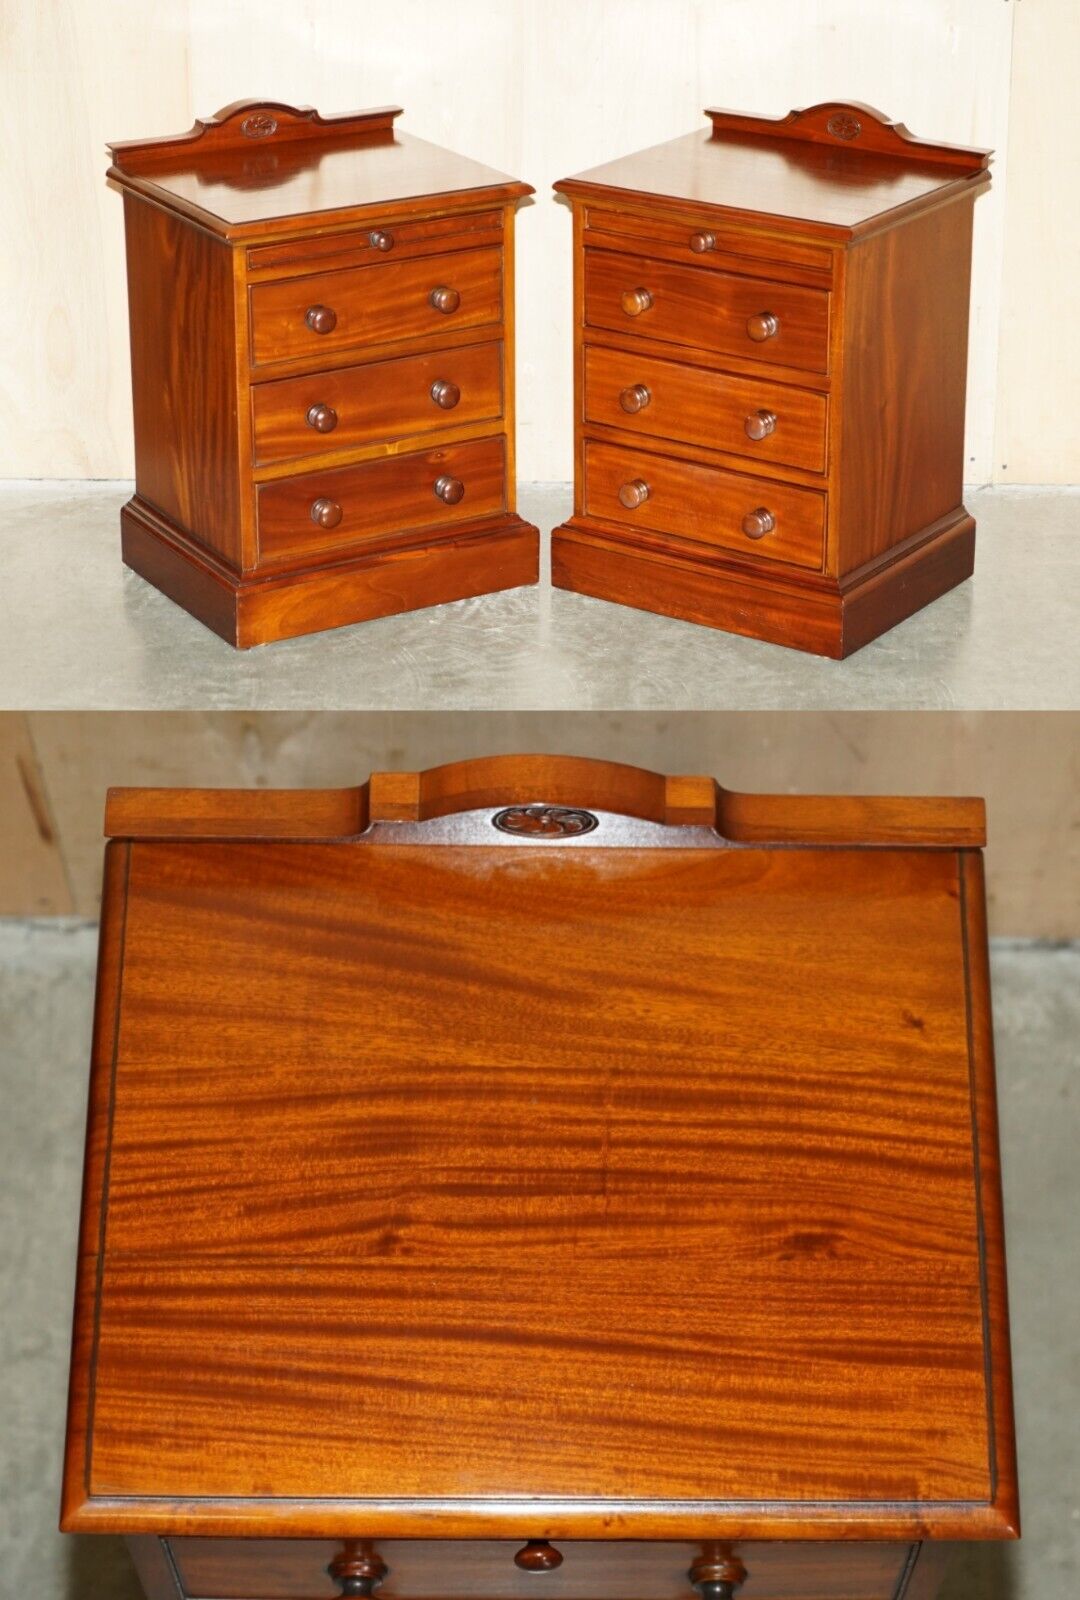 PAIR OF VINTAGE FLAMED MAHOGANY BEDSIDE TABLE NIGHTSTAND DRAWERS PART SUITE